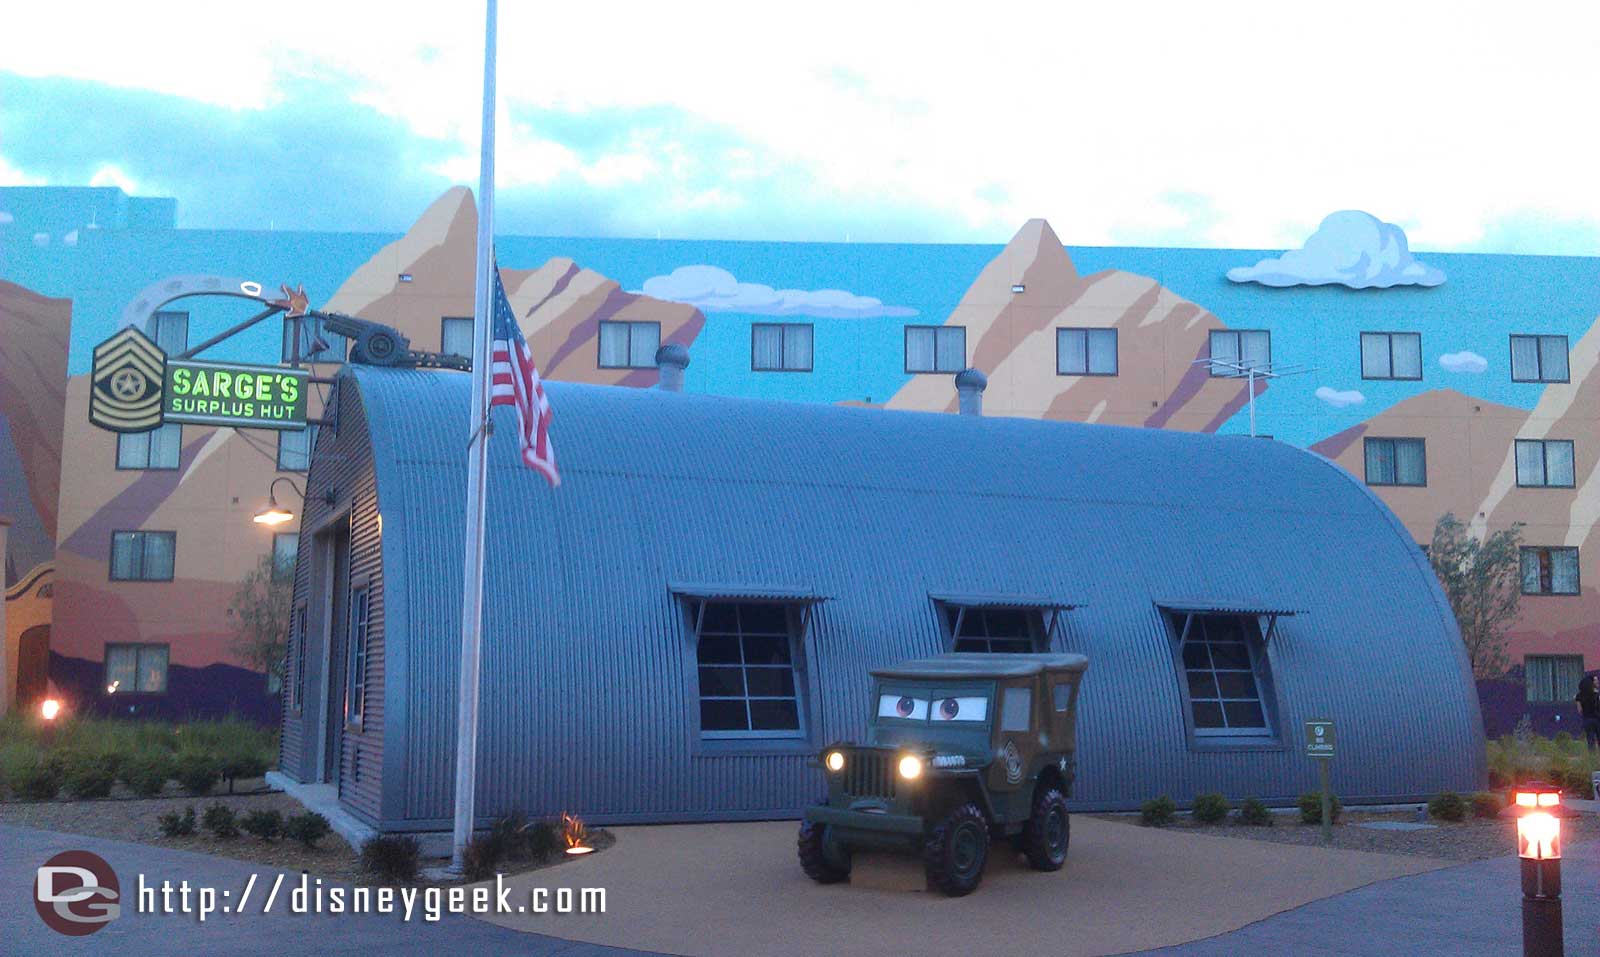 Sarge out by his Surplus Hut. Notice the flag is at half staff today.